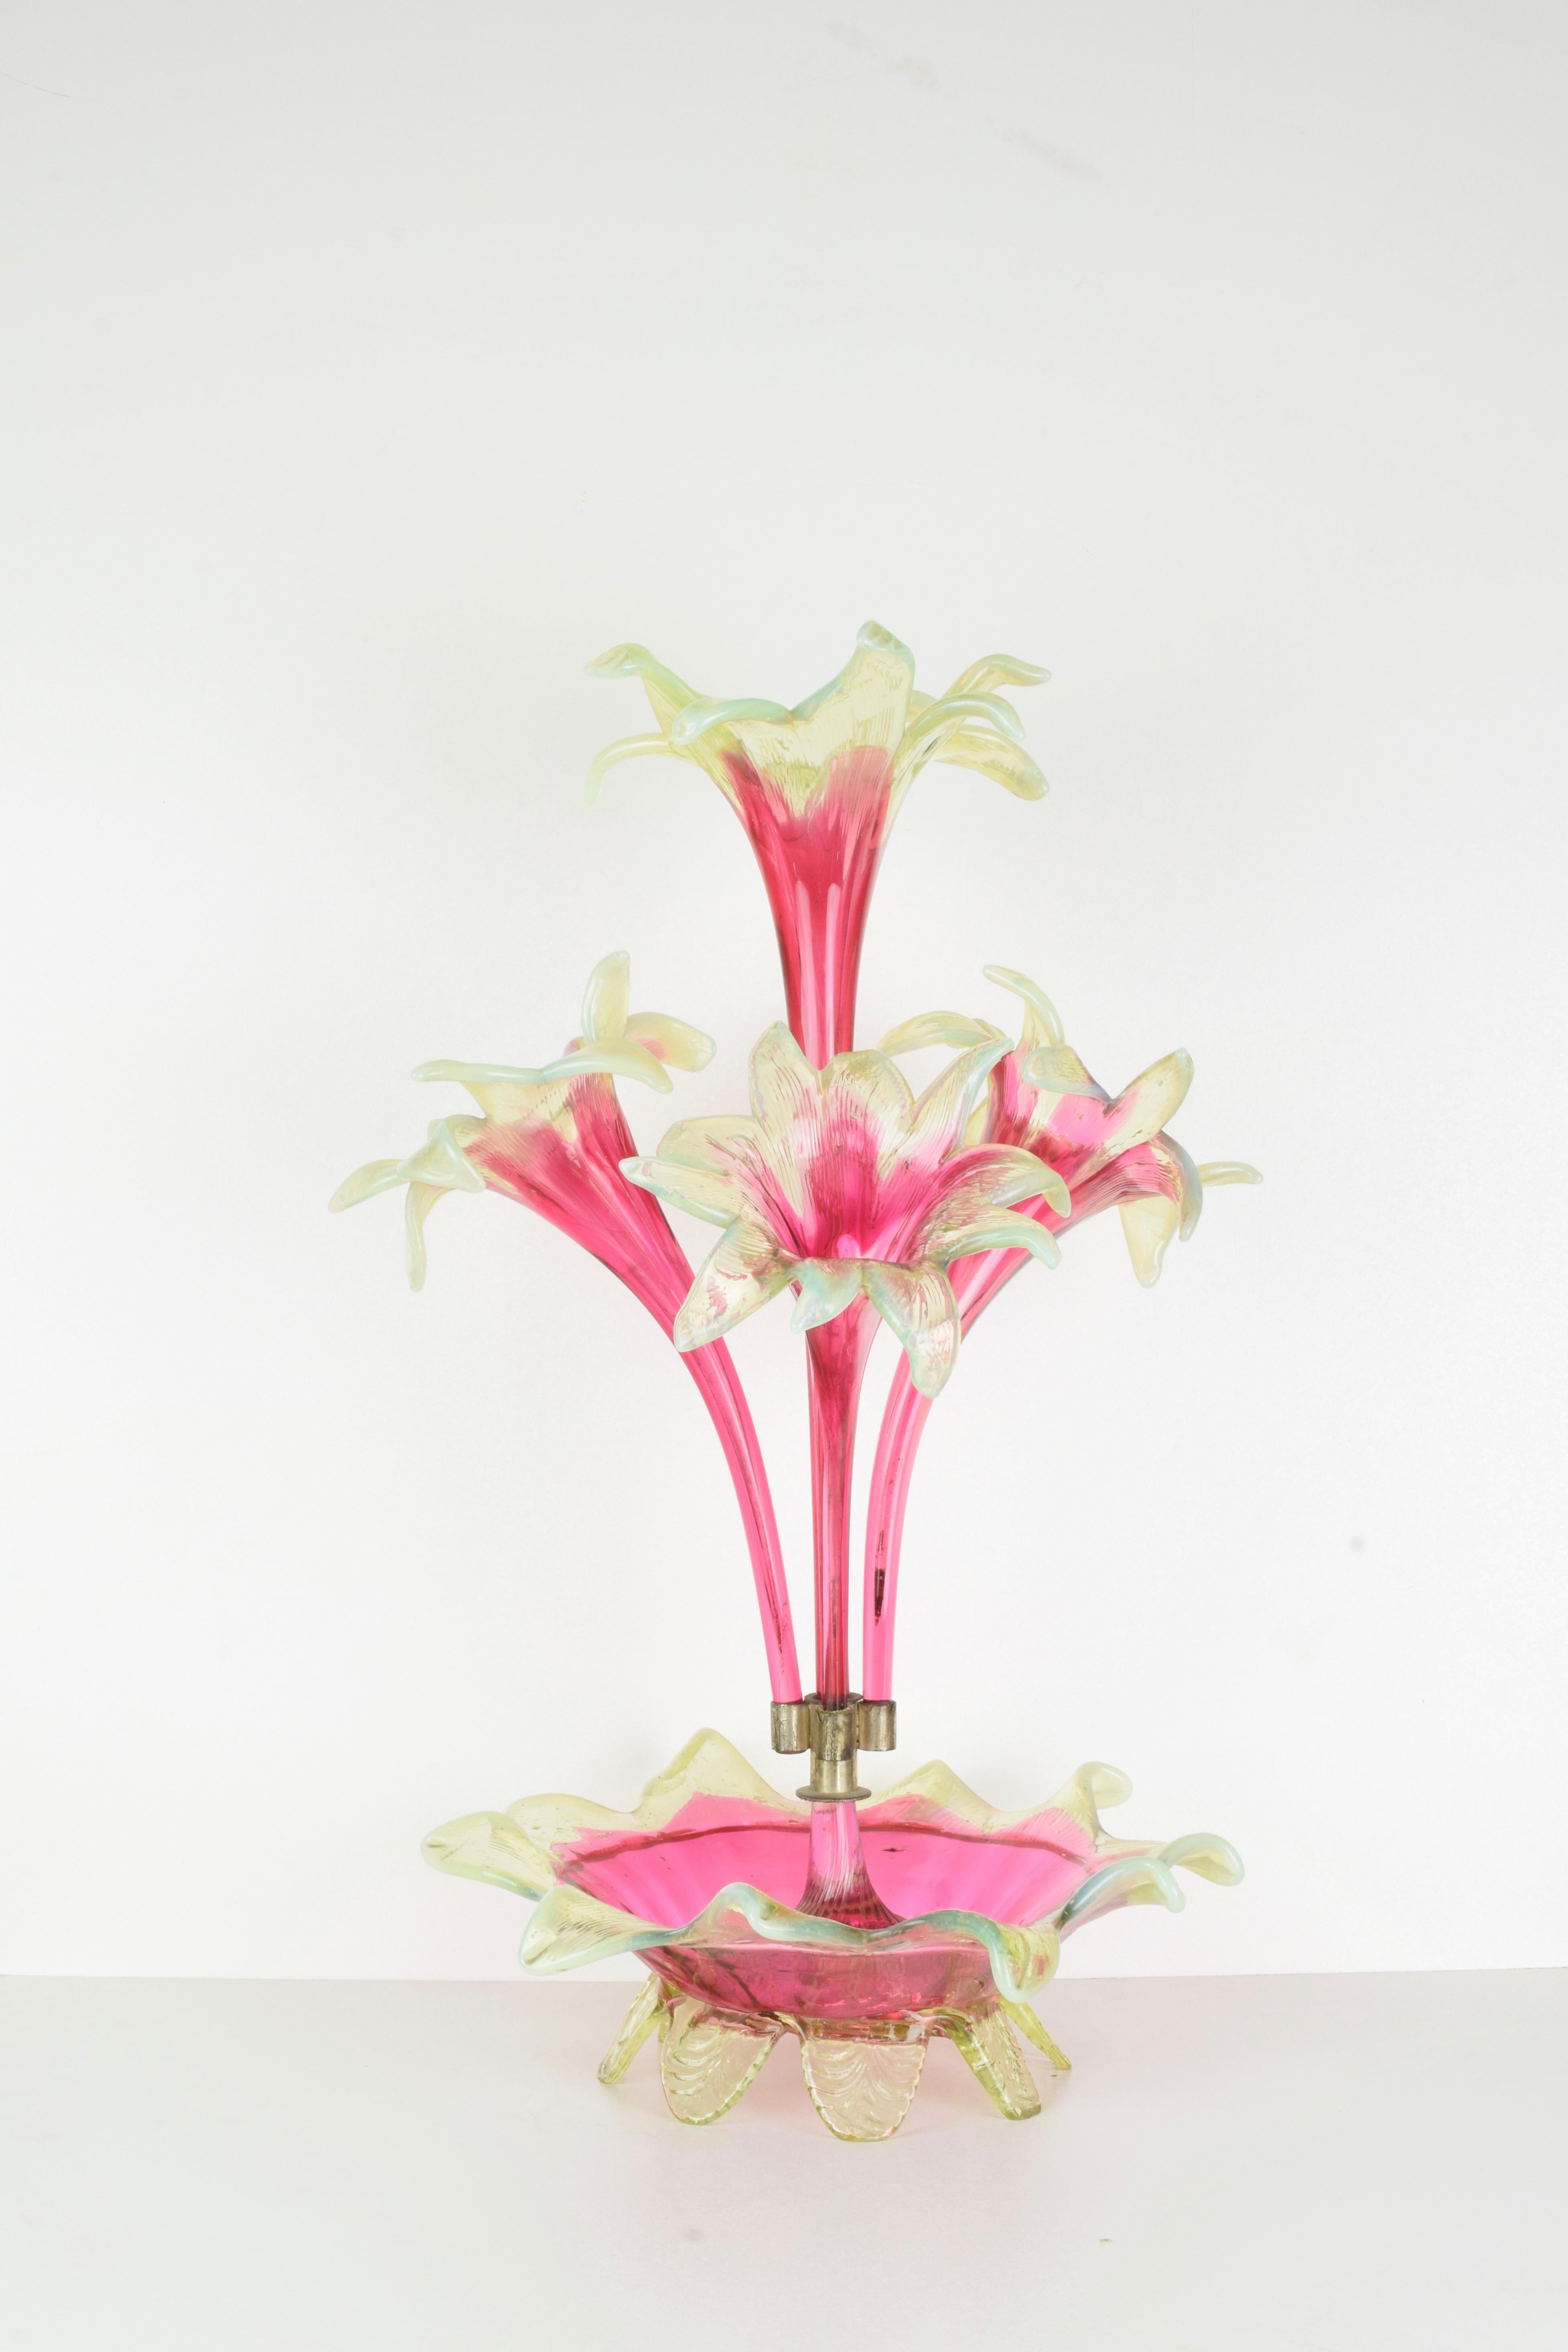 Murano, Venezia, Italy, early 20th century
Spectacular Murano glass centerpiece with tray and 4 flowers.
The glass is hand blown and artfully crafted using opal and clear glass.